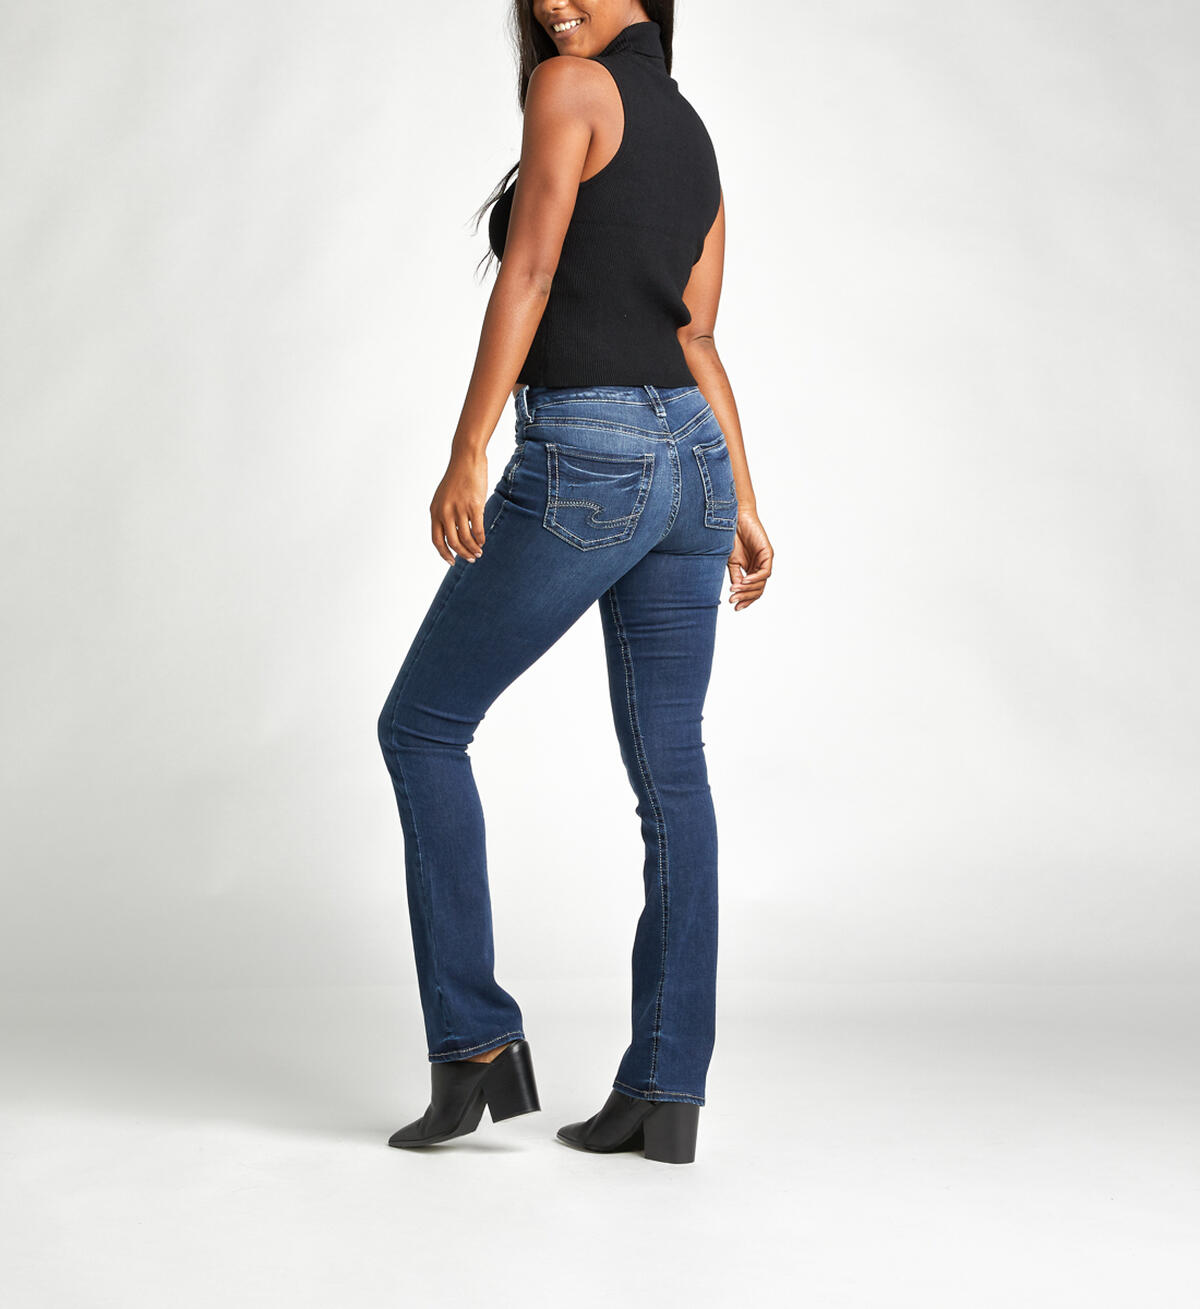 Aiko Mid Rise Slim Bootcut Jeans Final Sale, , hi-res image number 1